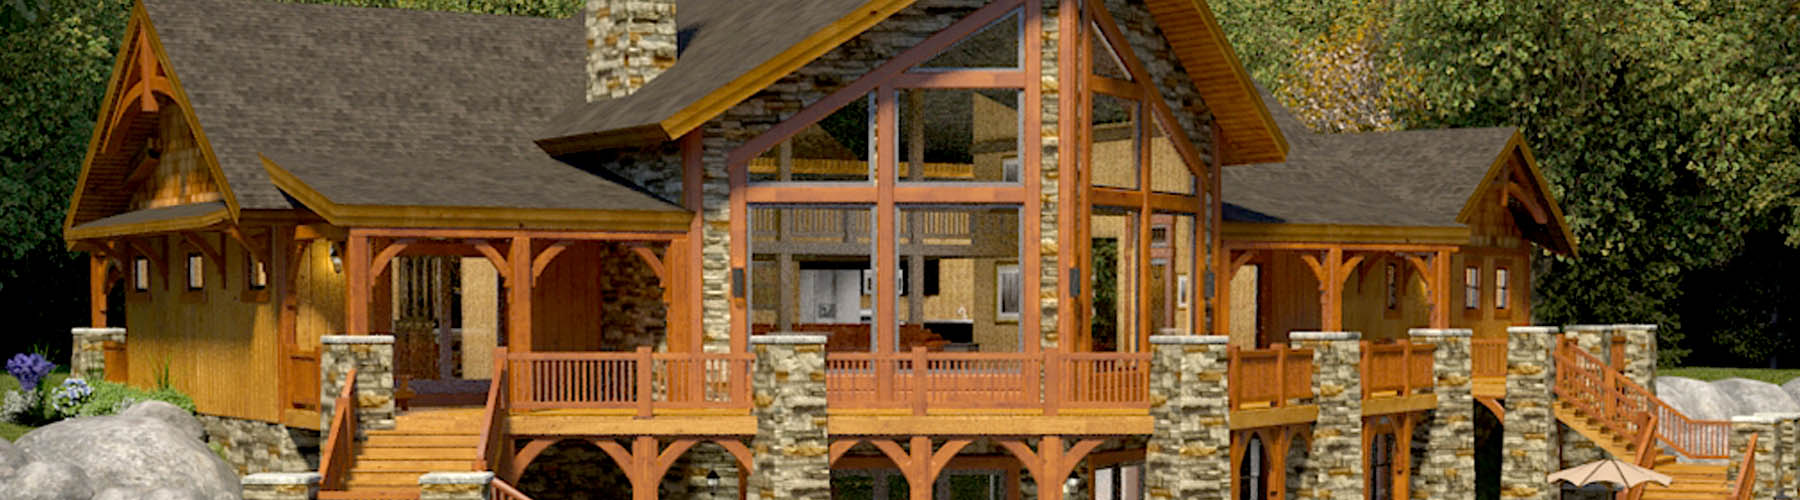 Epic Timber Ranch 2328AL-UCT Lofted Ultra Custom Timber